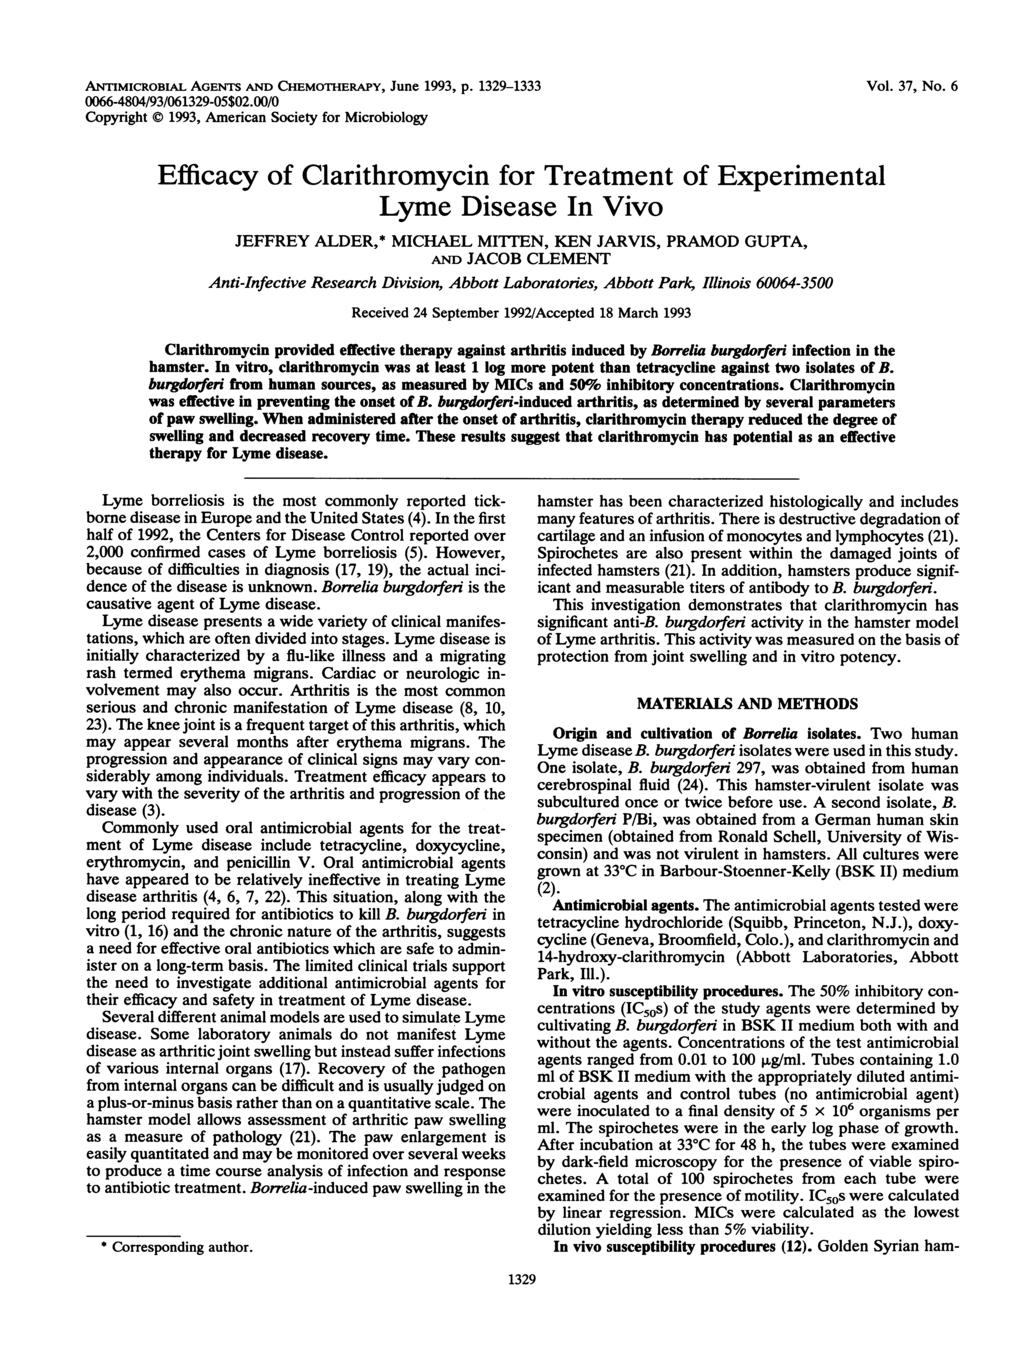 ANTIMICROBLAL AGENTS AND CHEMOTHERAPY, June 1993, p. 1329-1333 0066-4804/93/061329-05$02.00/0 Copyright X) 1993, Americn Society for Microbiology Vol. 37, No.